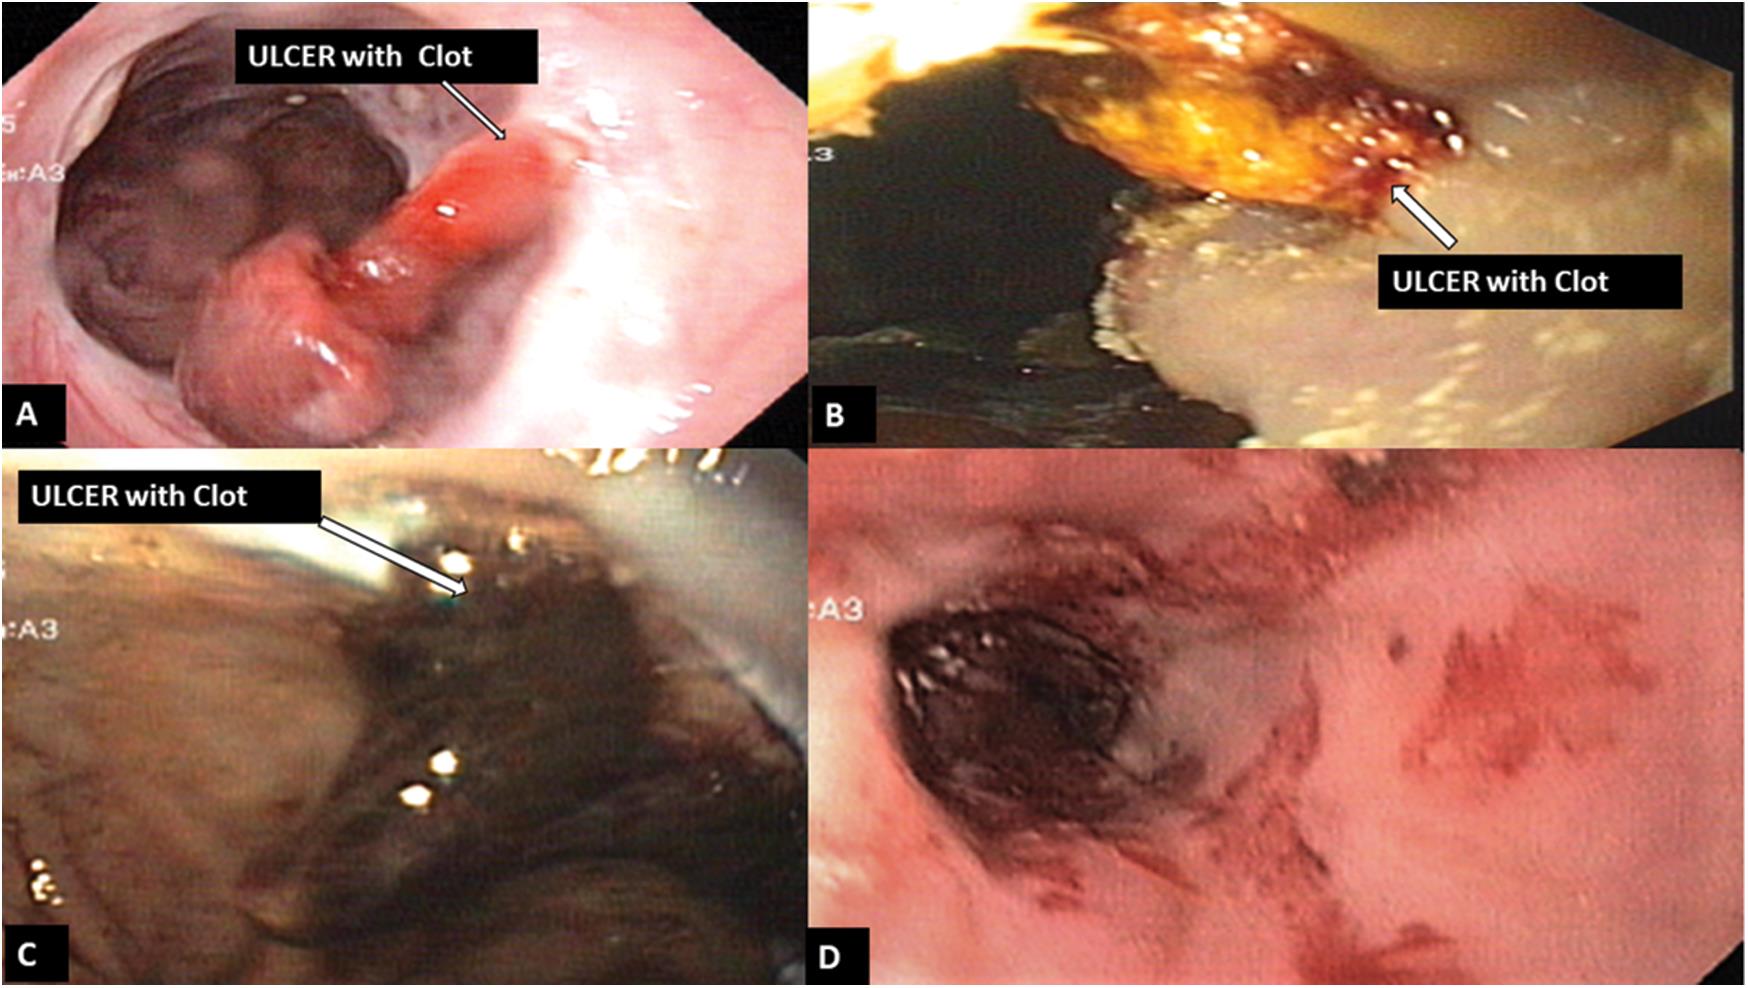 Type C ulcer with visible clots, scab or exudates from the ulcer without any bleeding.